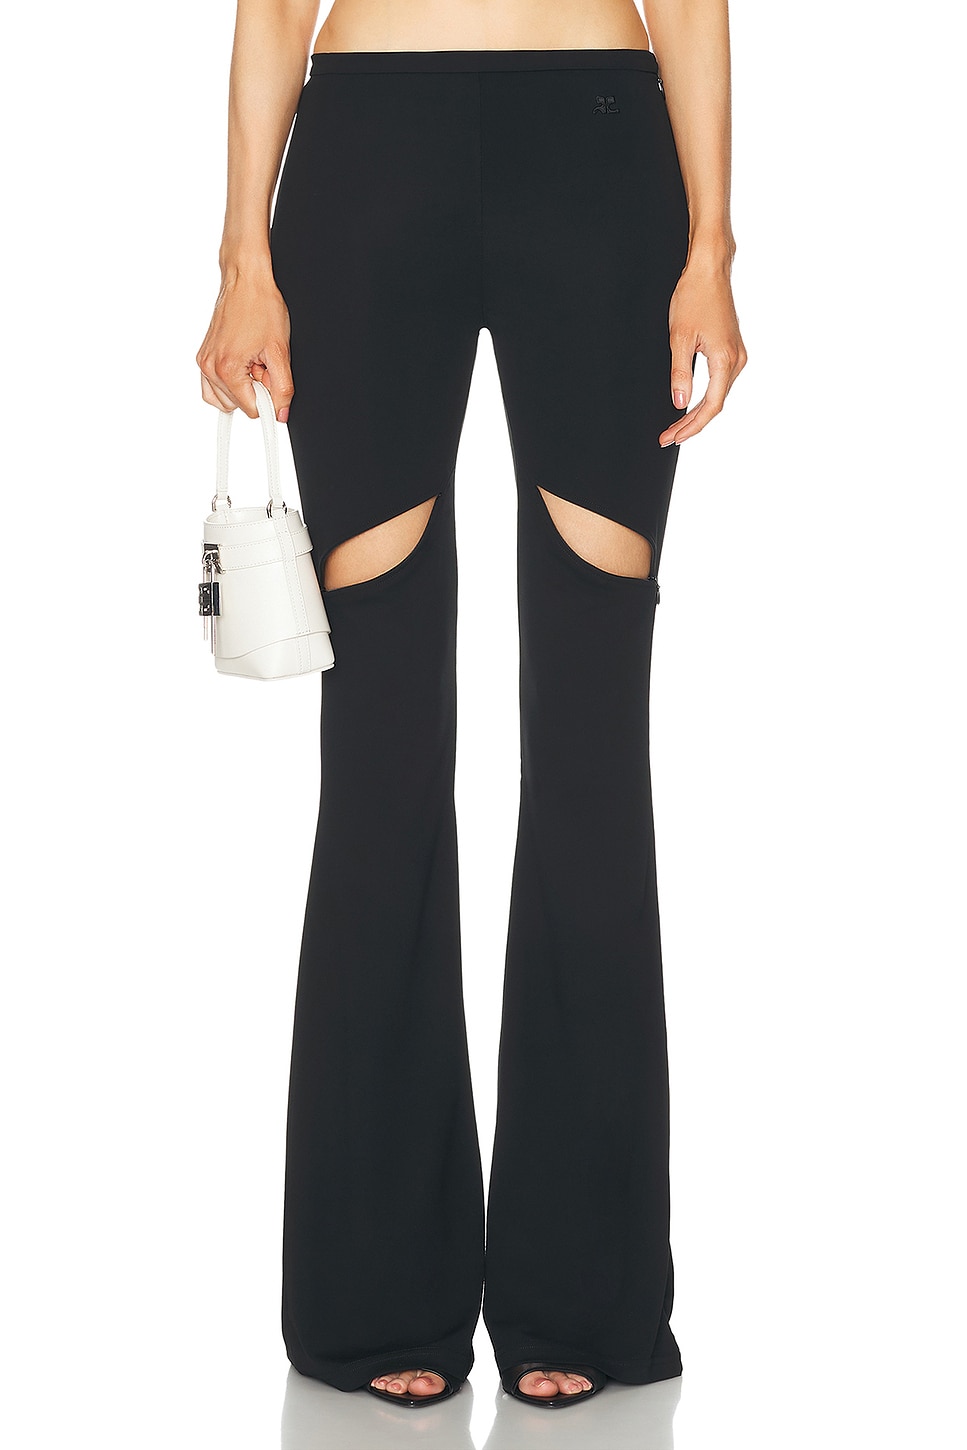 Image 1 of Courreges Ellipse Zip Crepe Jersey Bootcut Pant in Black